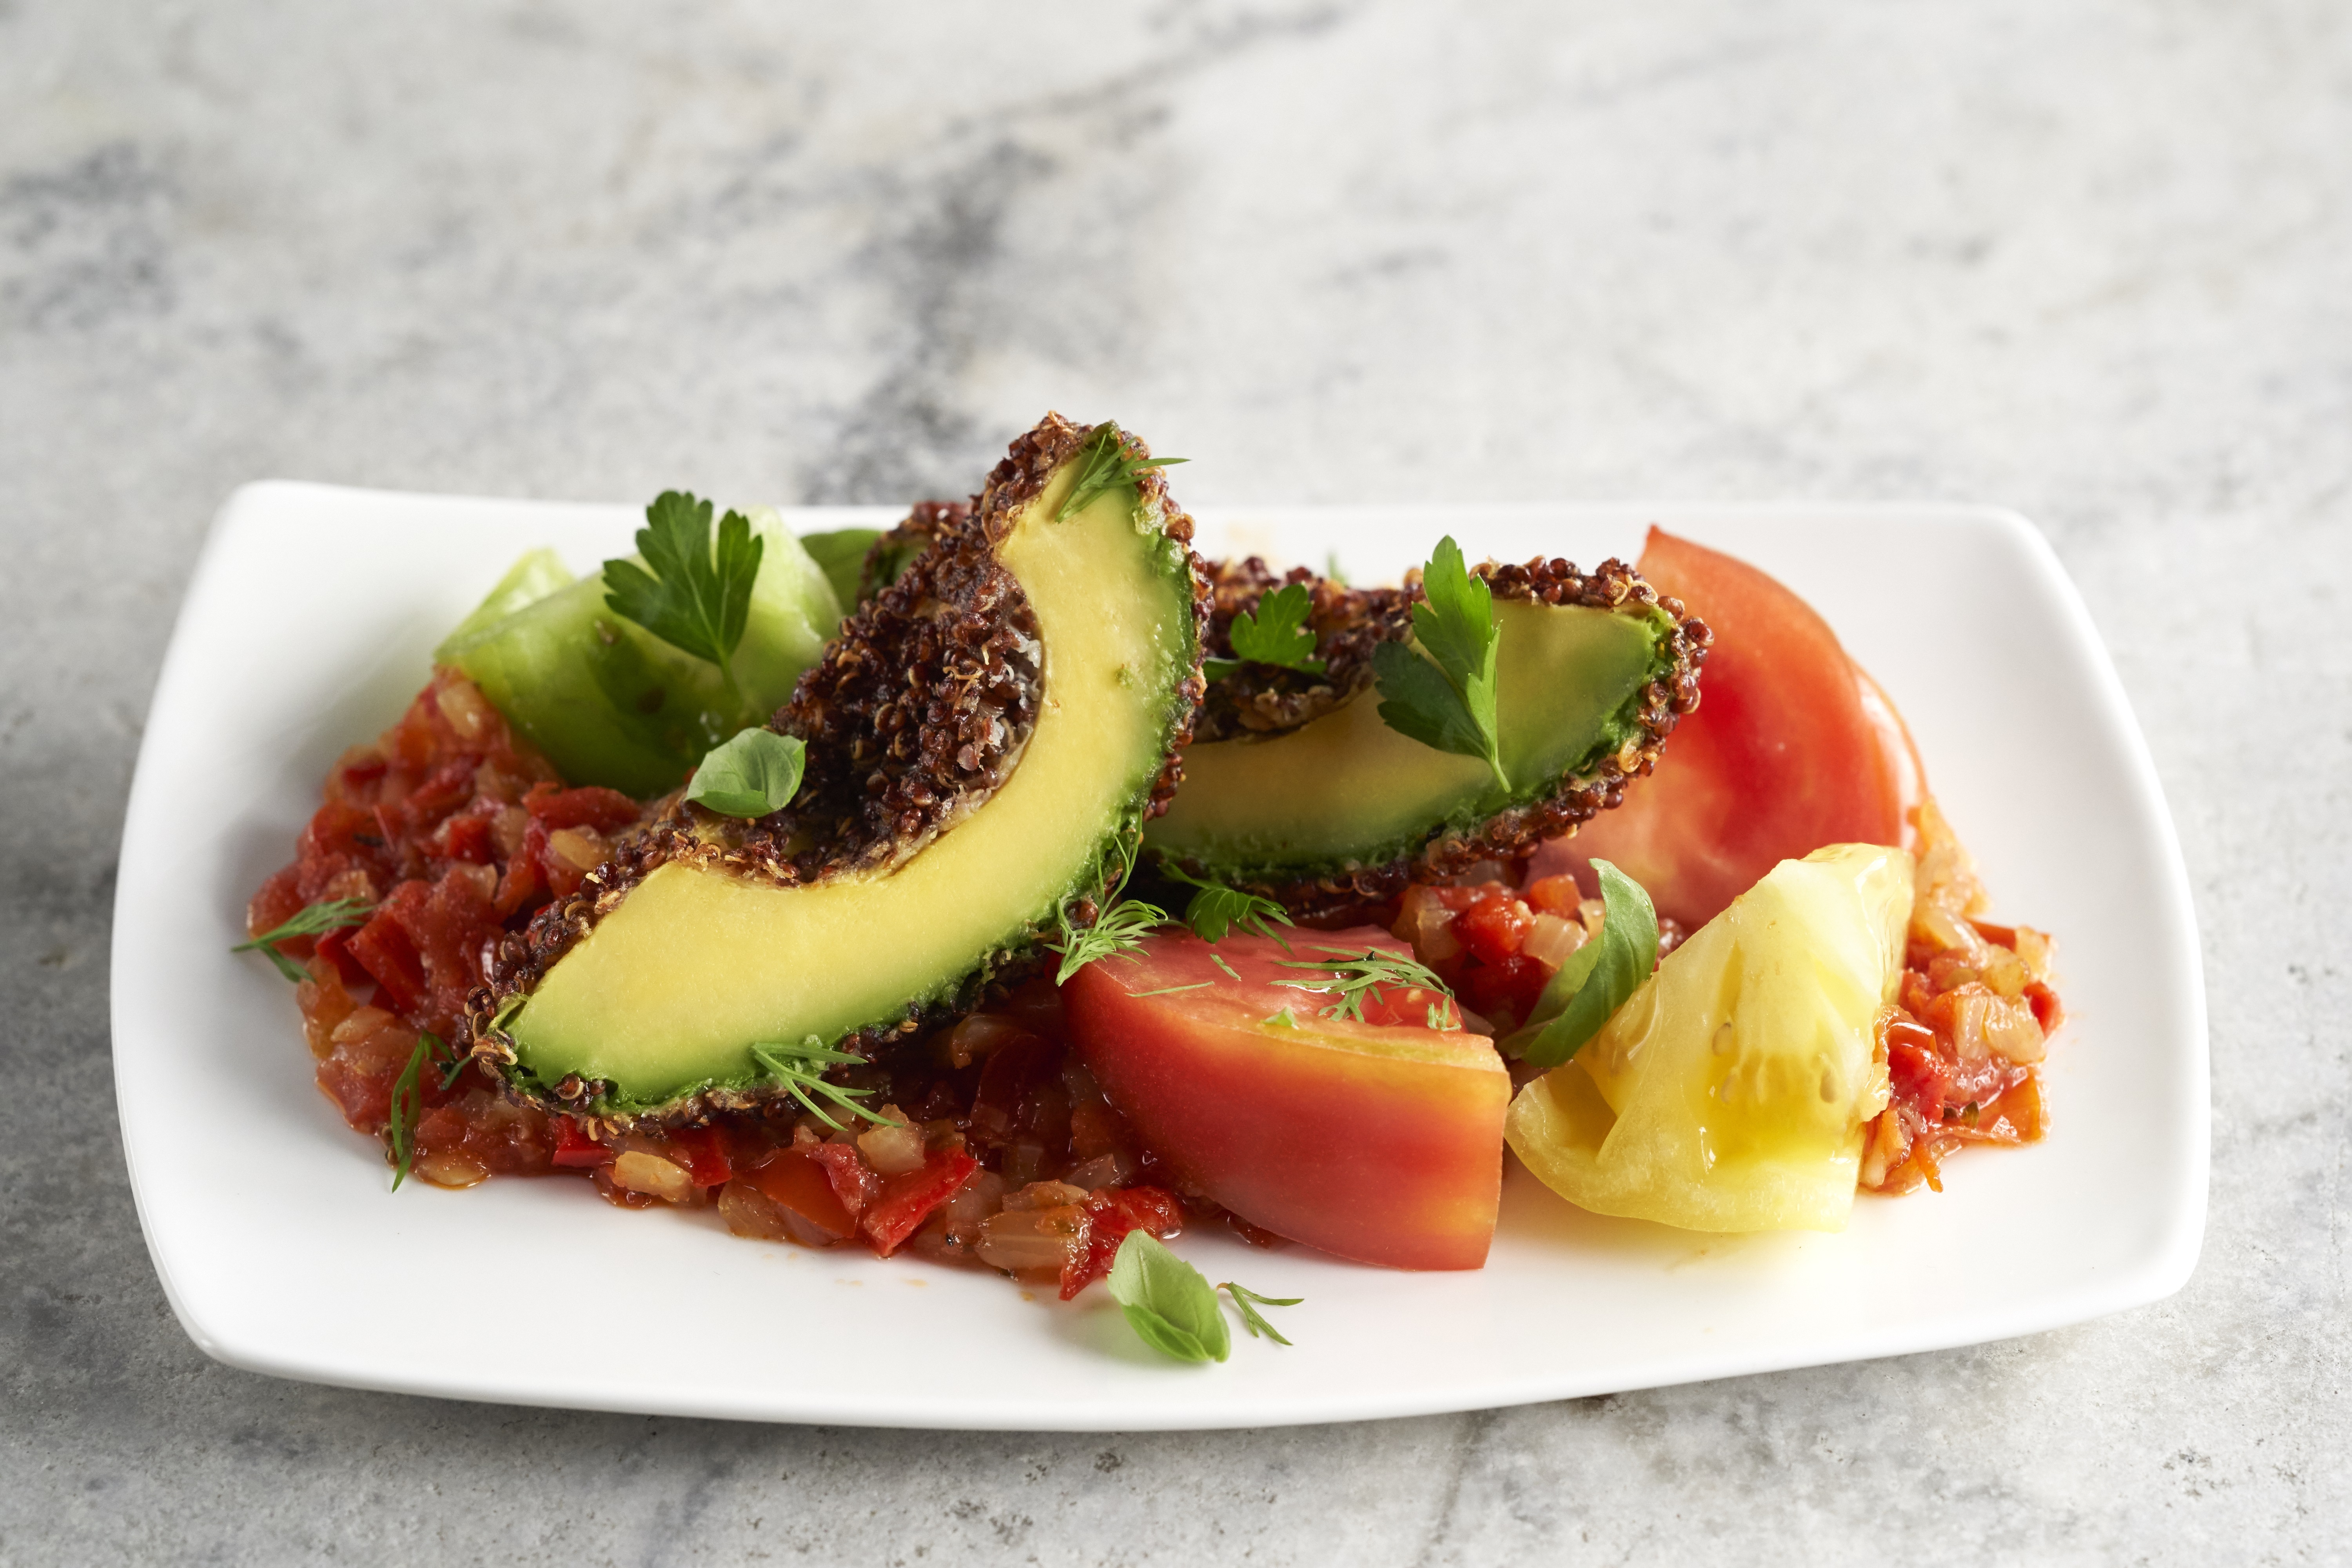 Freshen Up Your Summer Celebrations With California Avocados